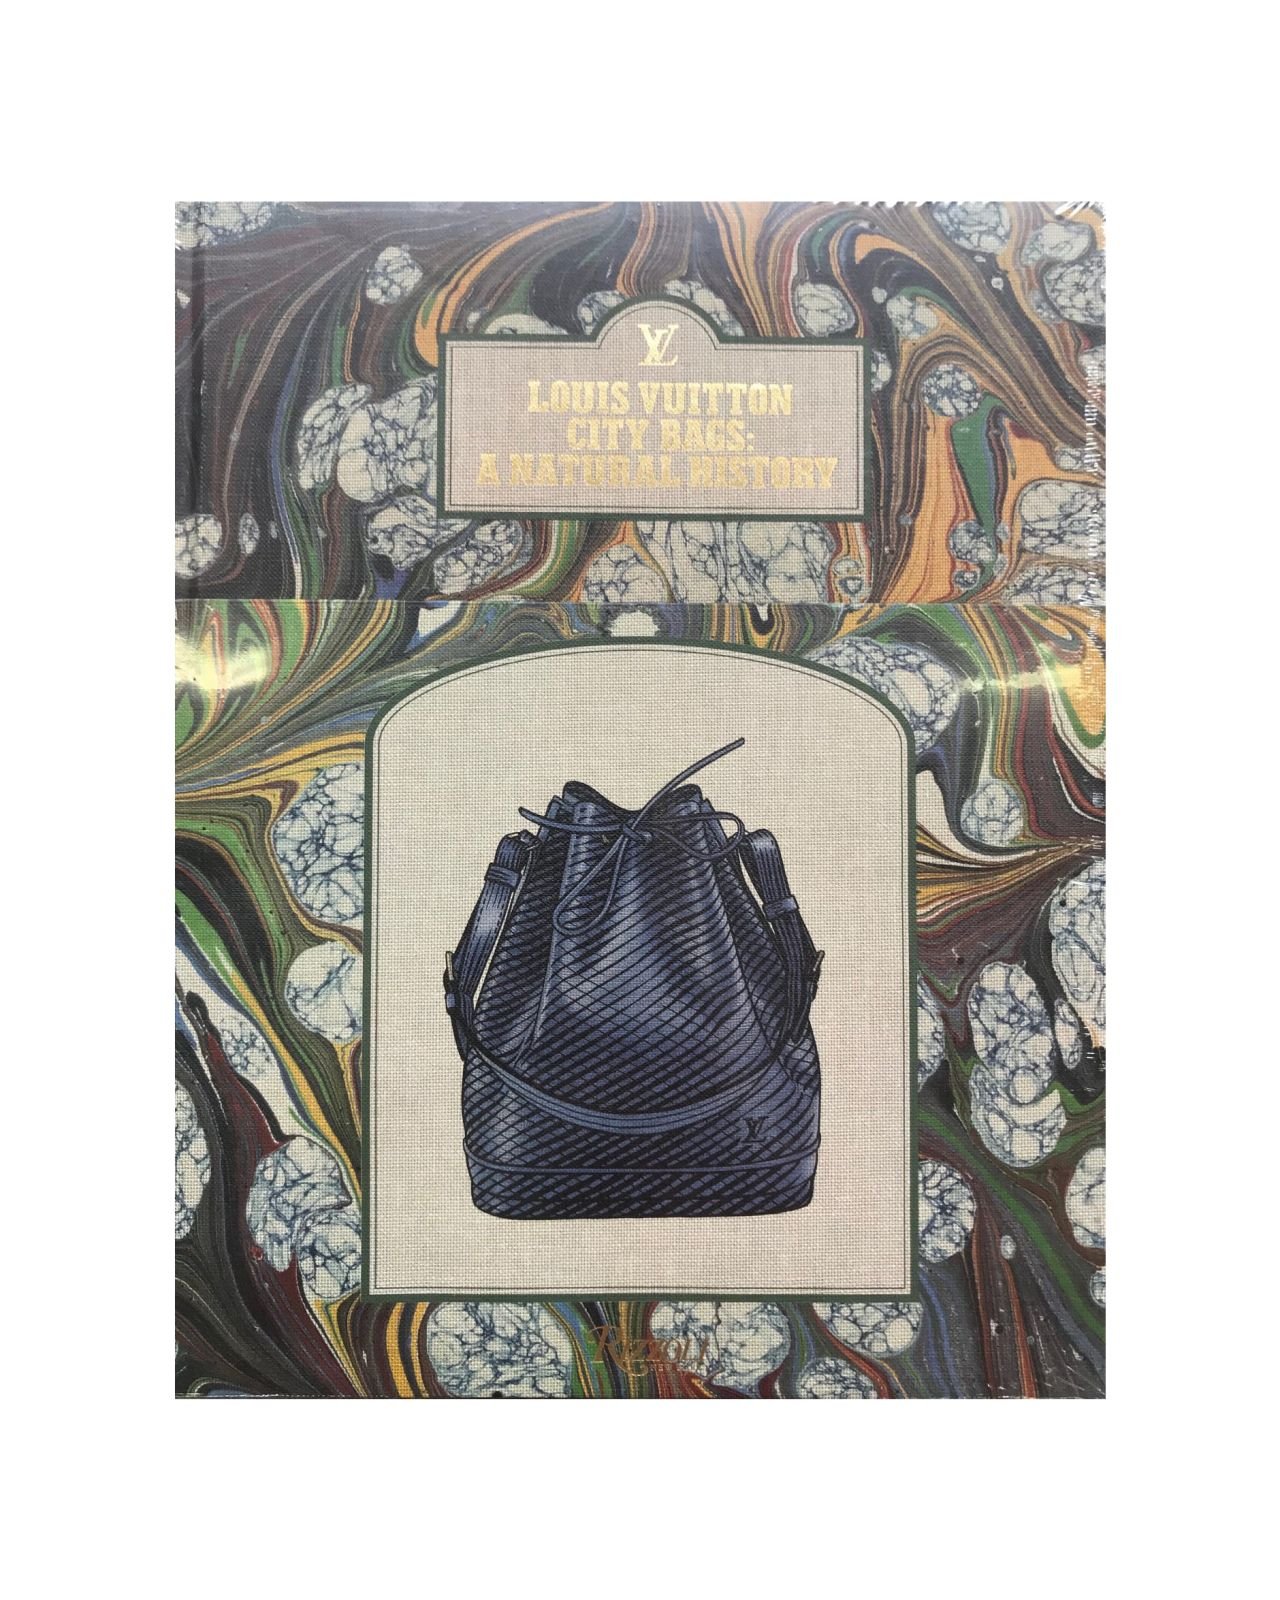 Louis Vuitton City Bags: A Natural History (Hardcover) 